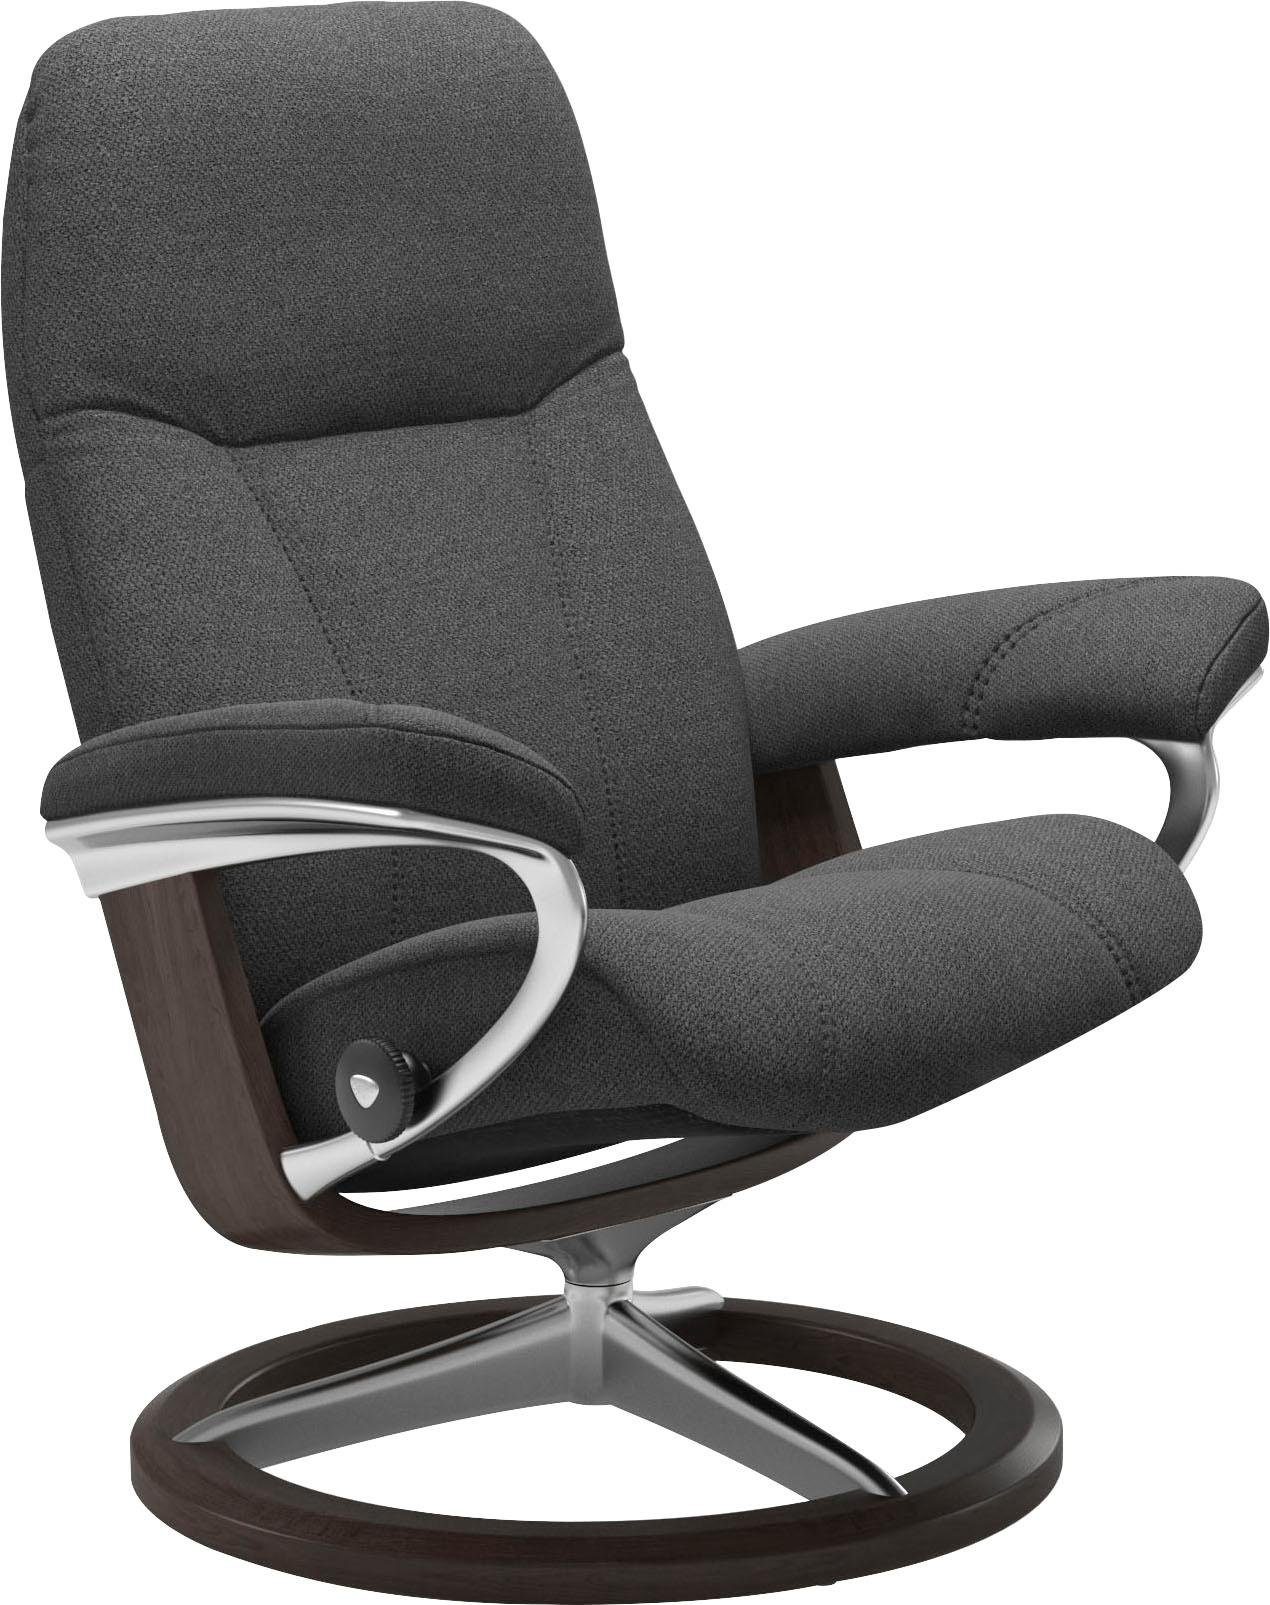 Stressless® Relaxsessel Consul, Größe Base, Gestell Wenge L, Signature mit